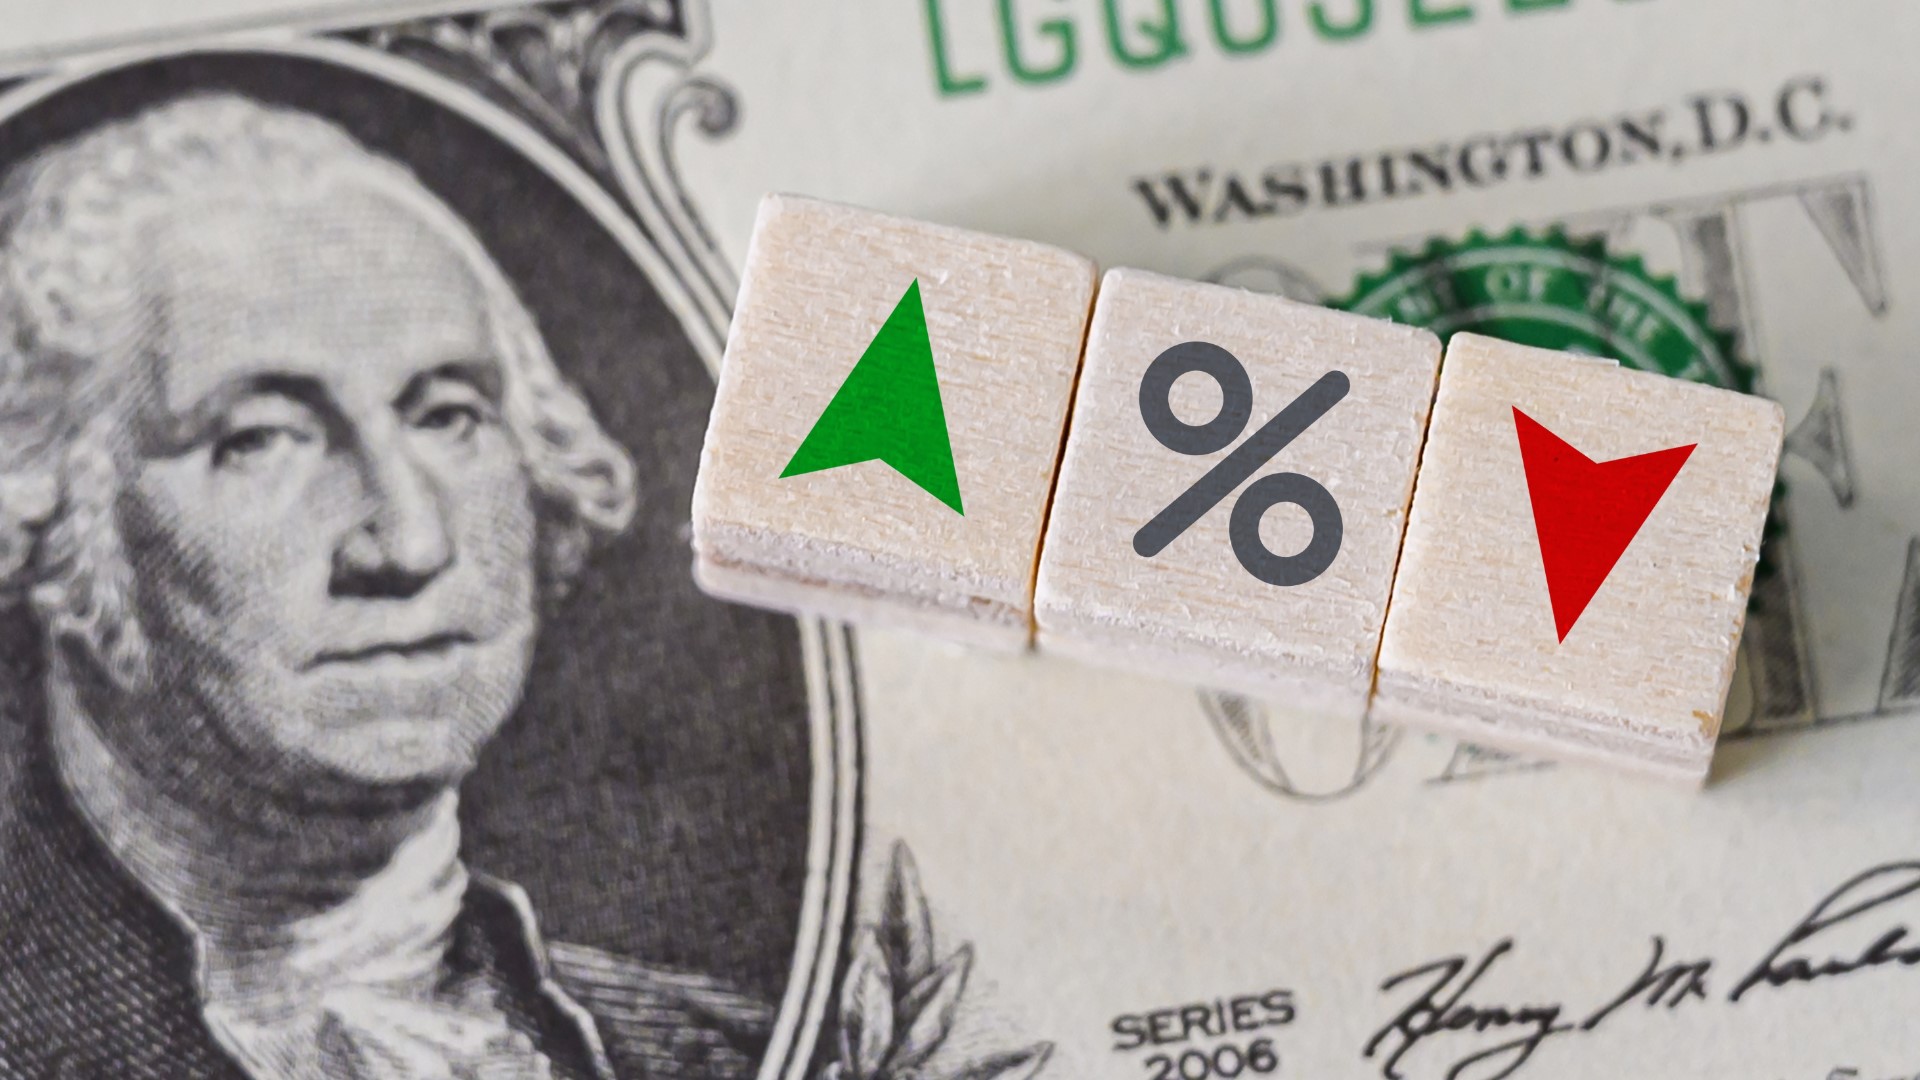 From mortgages and car loans, to savings accounts and stocks, here's how higher interest rates might affect everyday consumers.